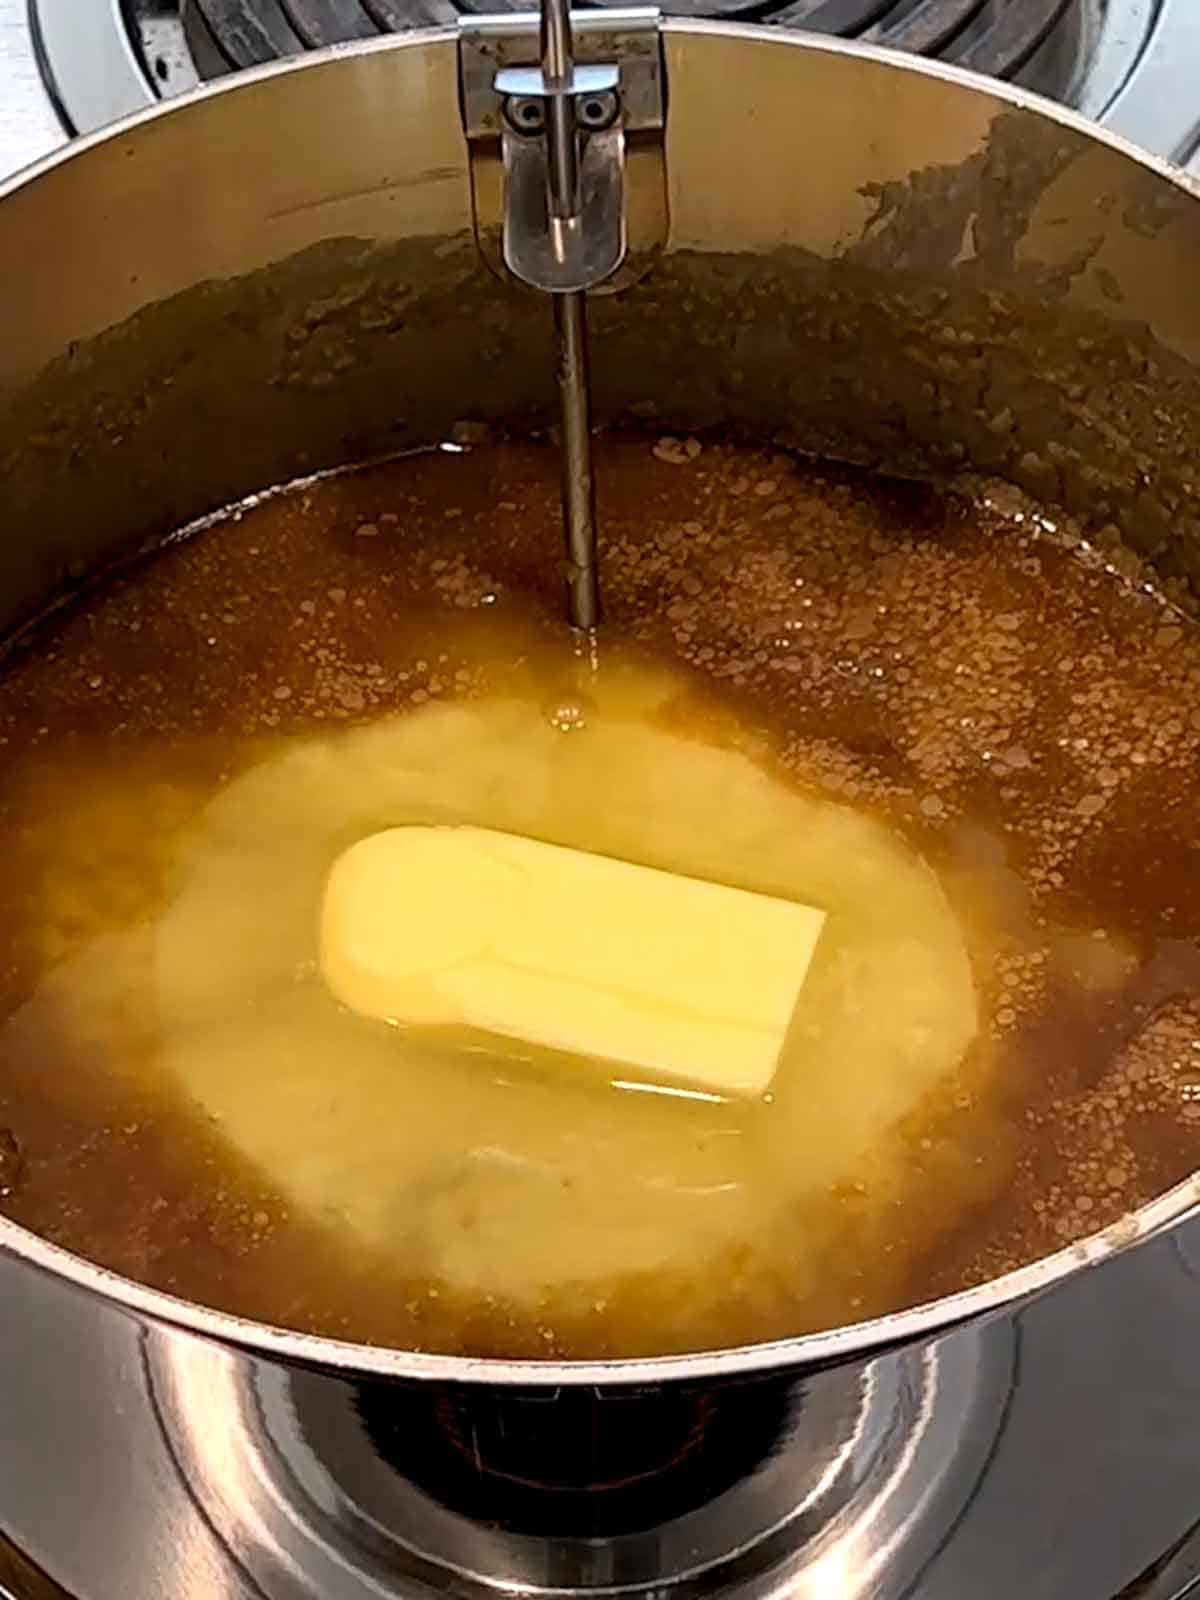 Butter added to the praline mixture.